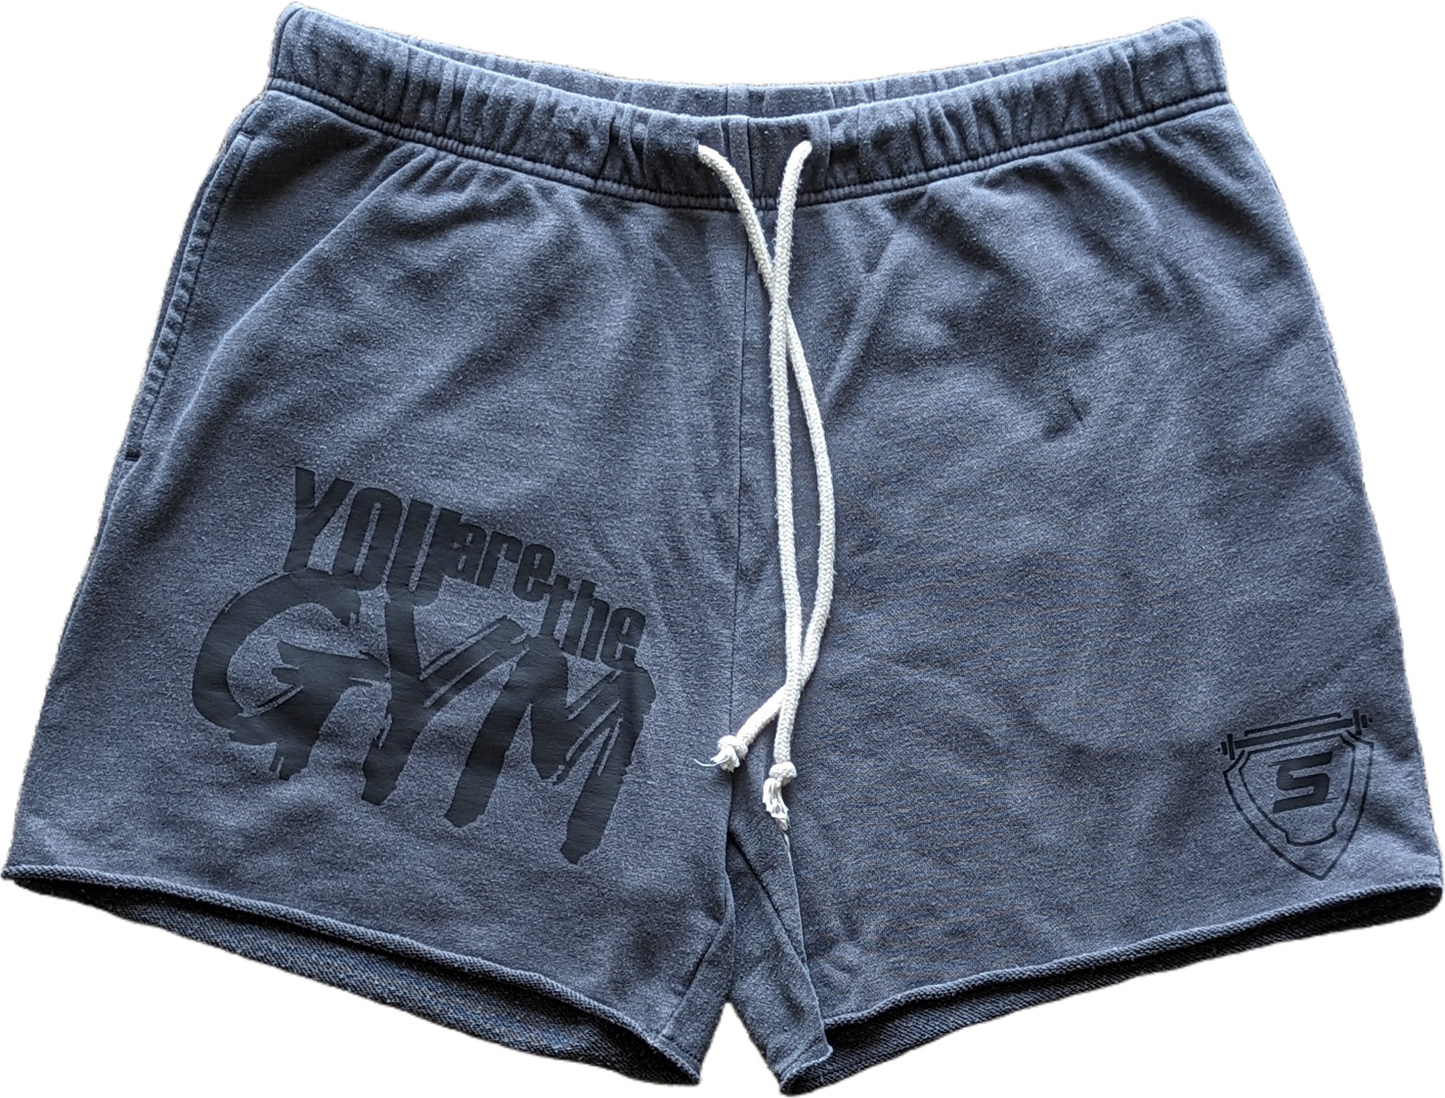 You Are the Gym - Men's Jogger Shorts